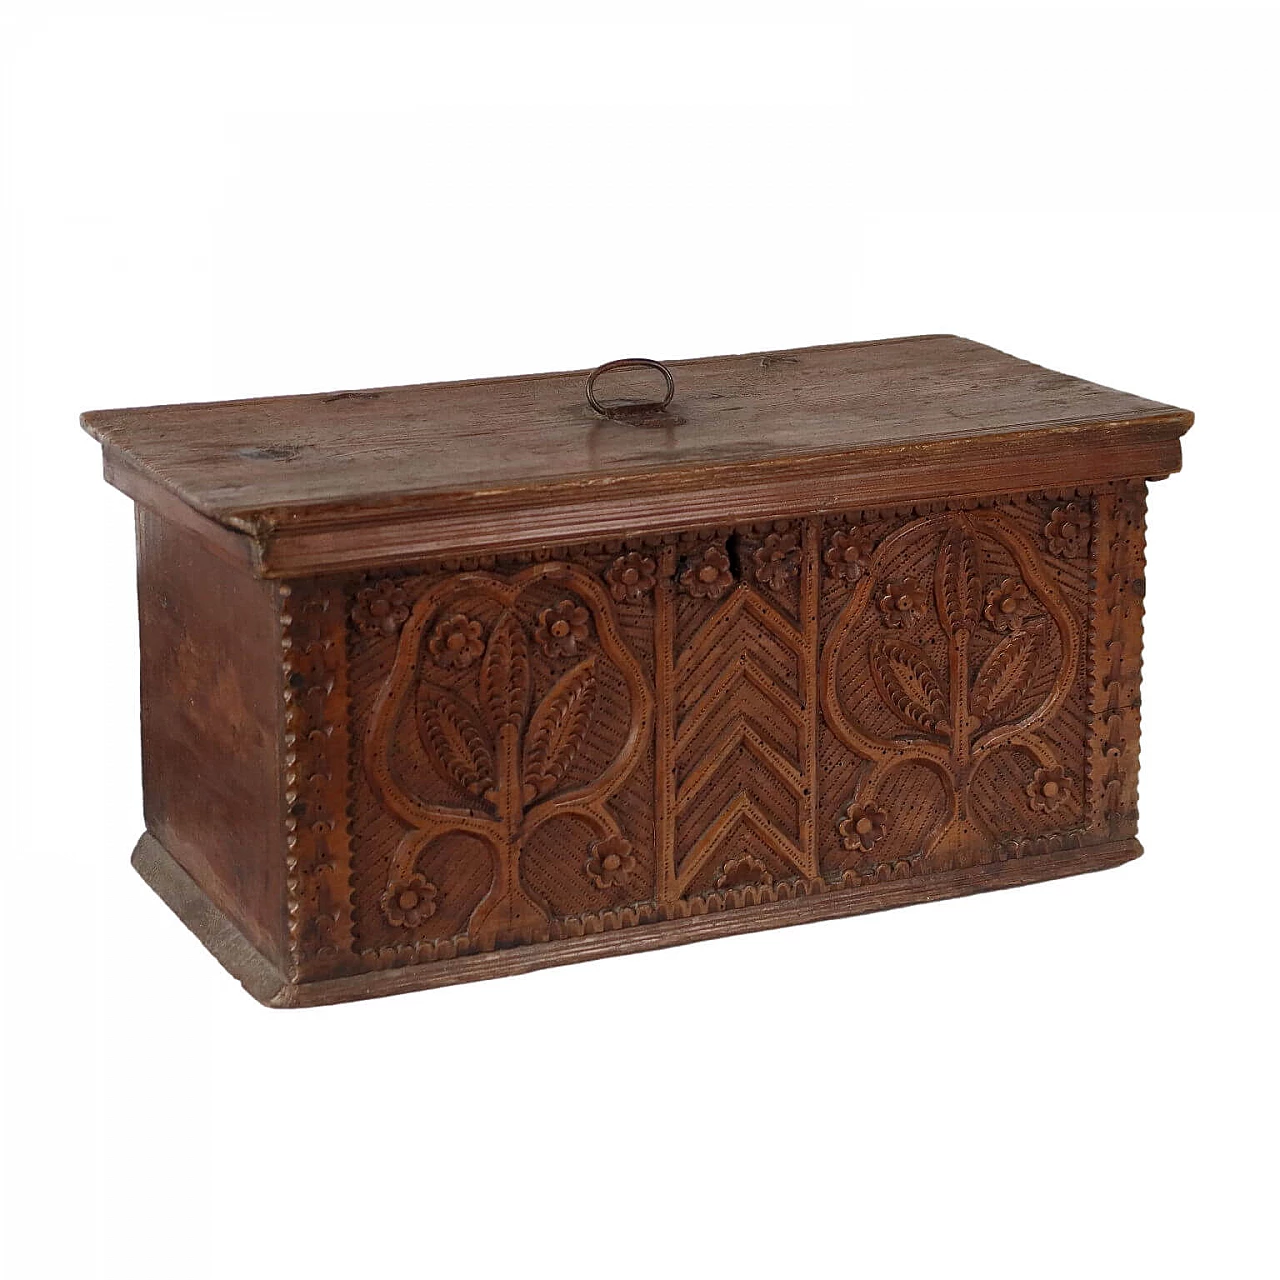 Late Renaissance box in swiss pine and maple, early 17th century 1